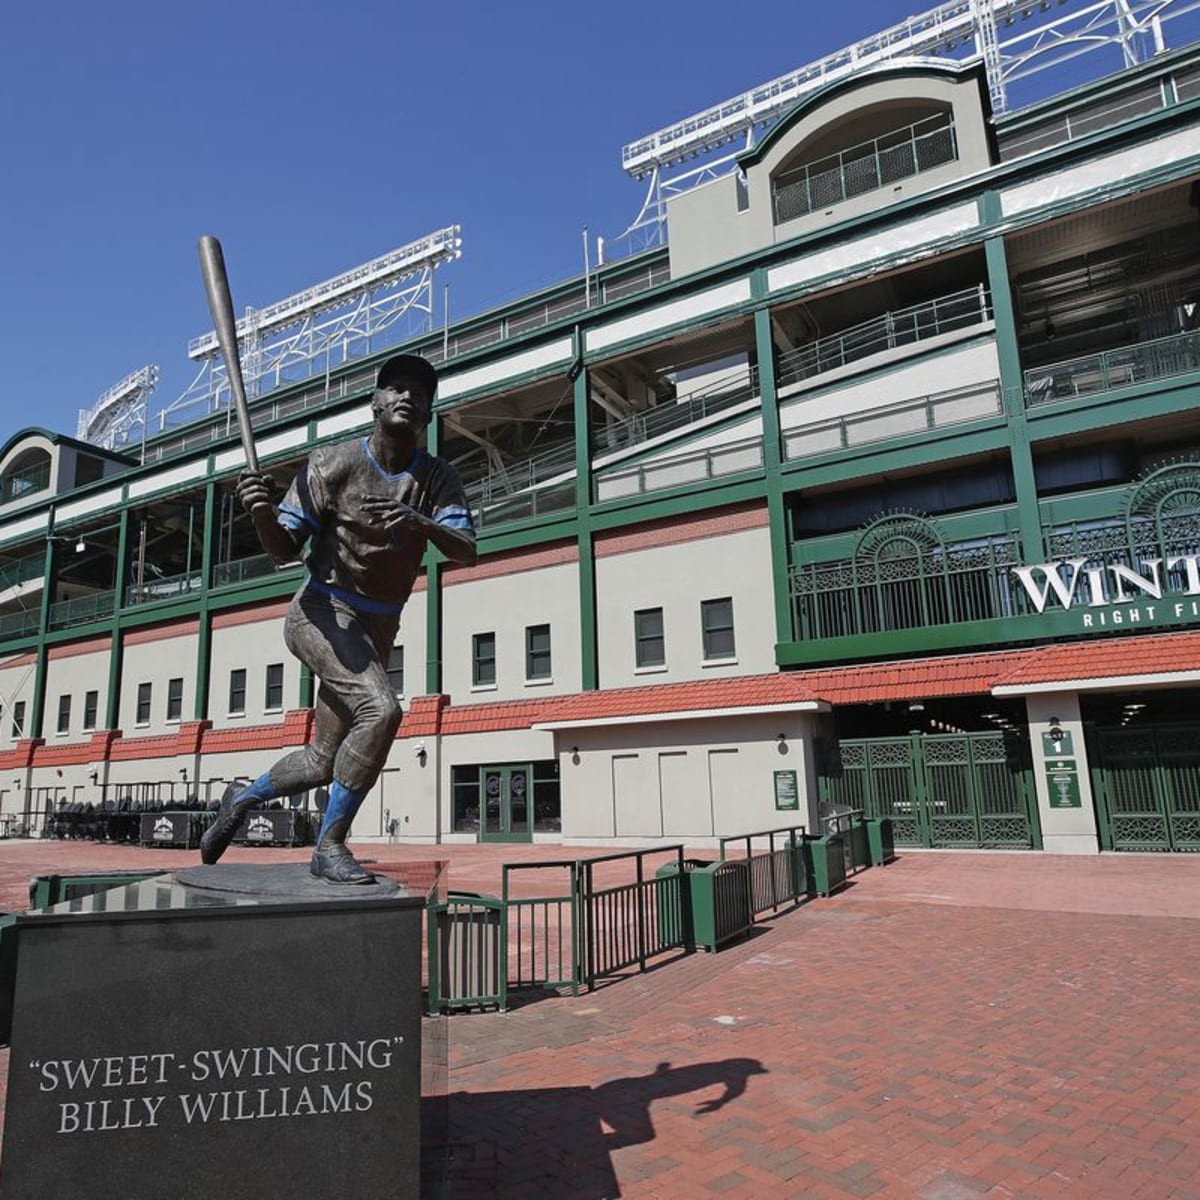 Cubs' Move Santo, Williams Statues Causing Quite the Uproar - On